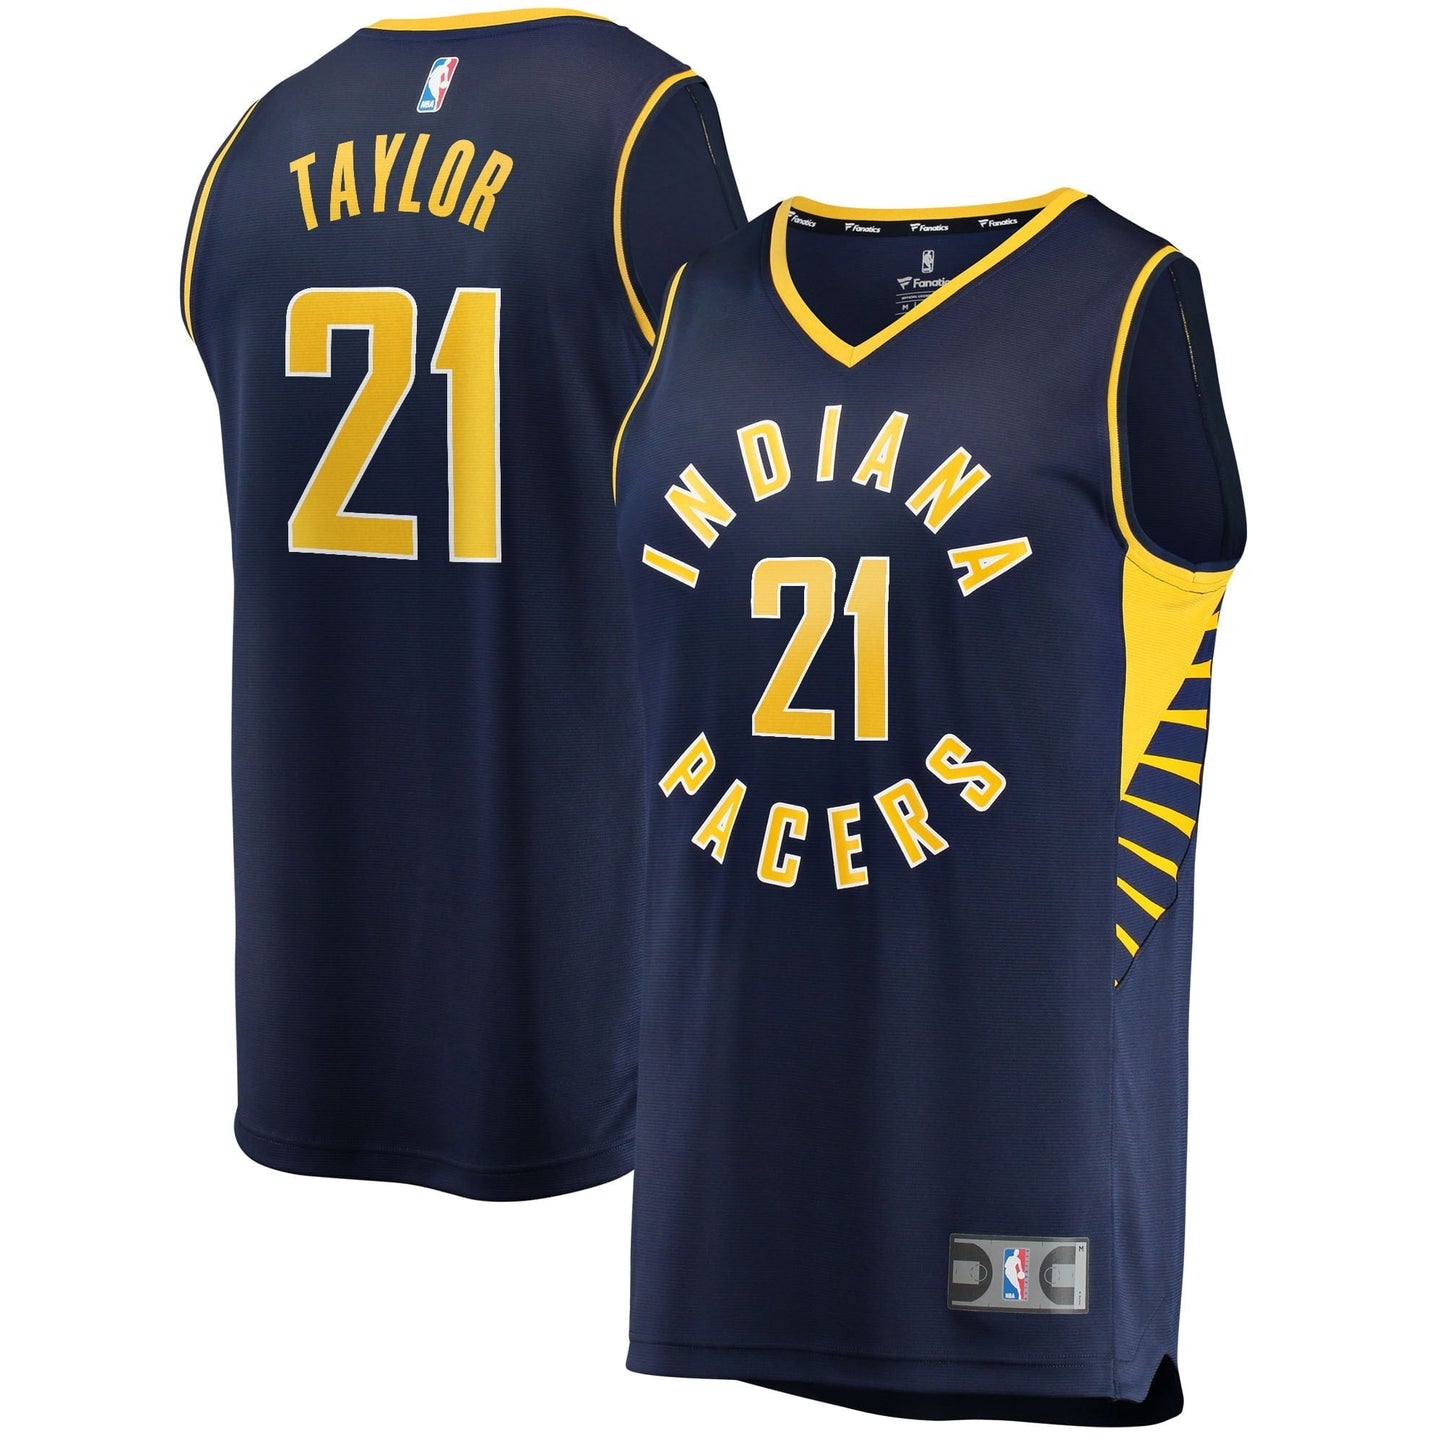 Men's Fanatics Branded Terry Taylor Navy Indiana Pacers 2021/22 Fast Break Replica Jersey - Icon Edition